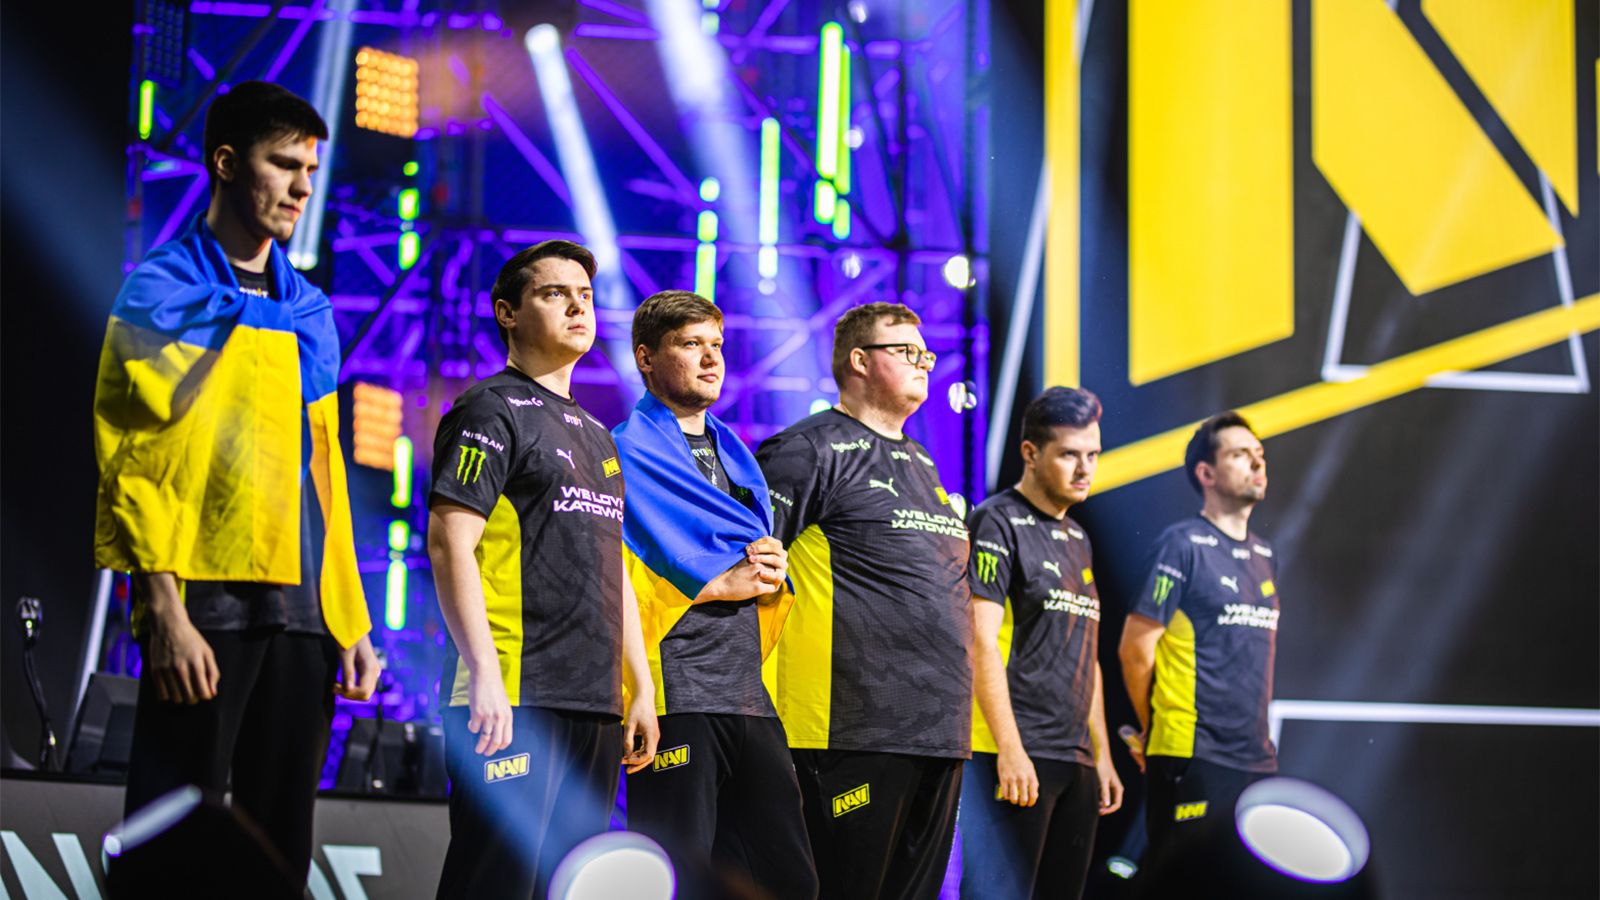 NaVi get their second win at EPL